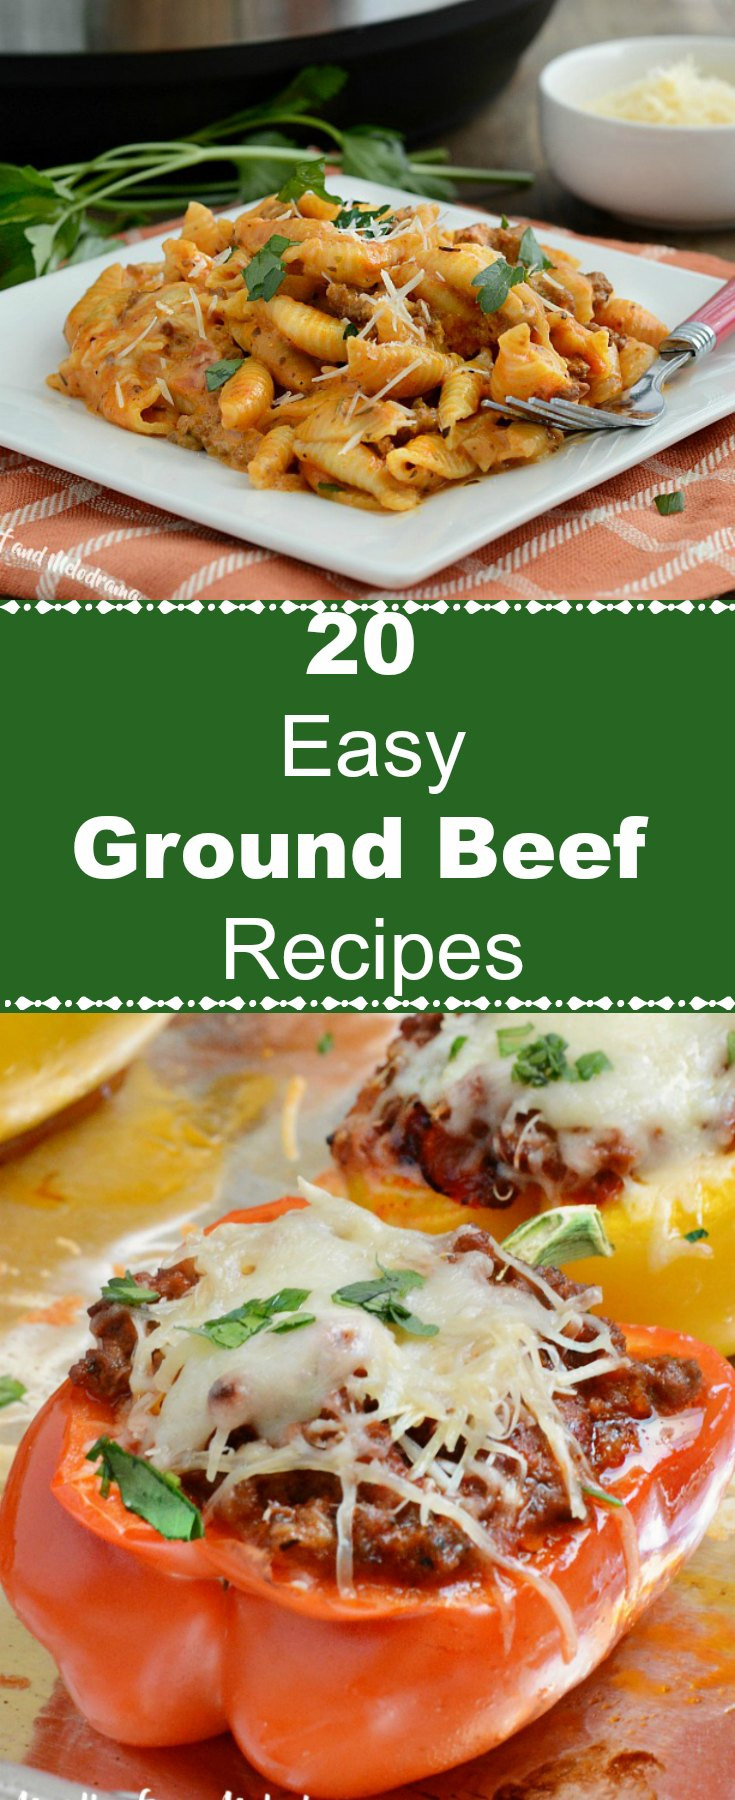 Simple Recipes With Ground Beef
 20 Easy Ground Beef Recipes Meatloaf and Melodrama